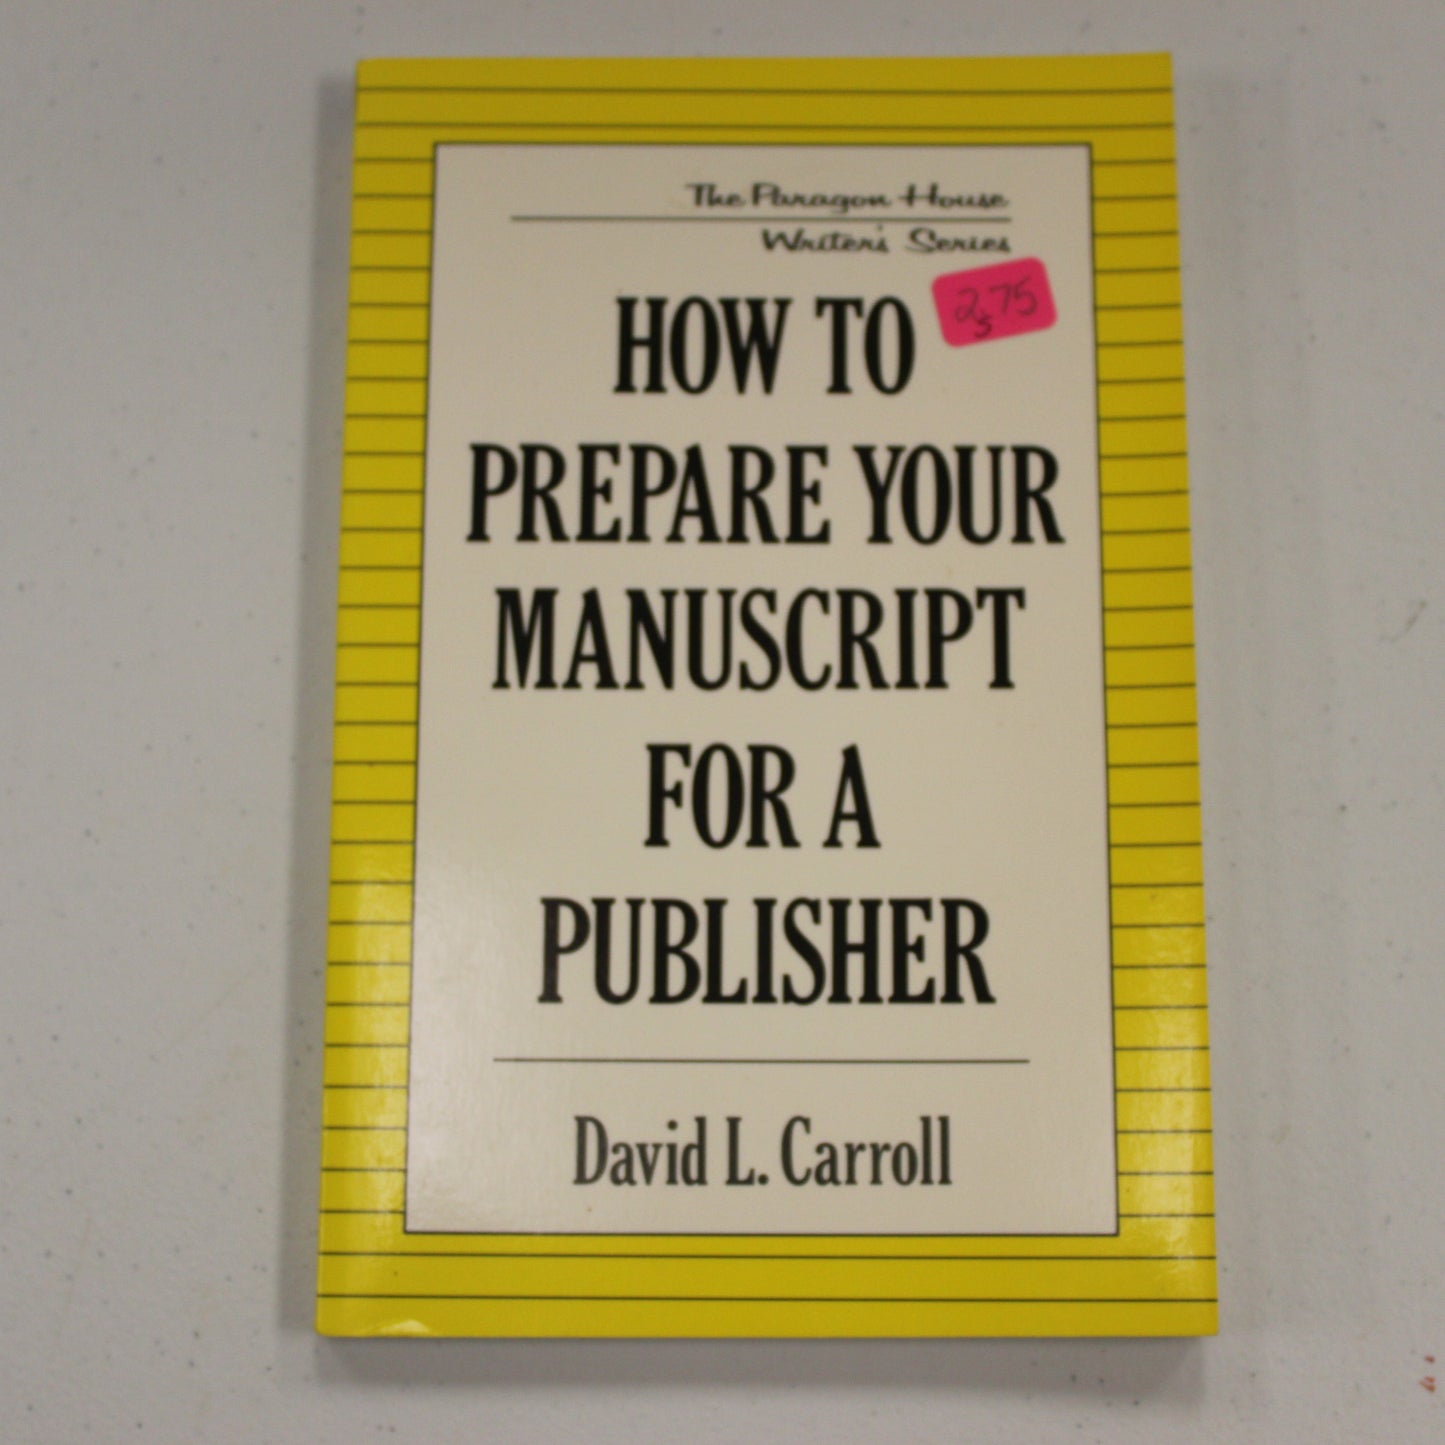 HOW TO PREPARE YOUR MANUSCRIPT FOR A PUBLISHER